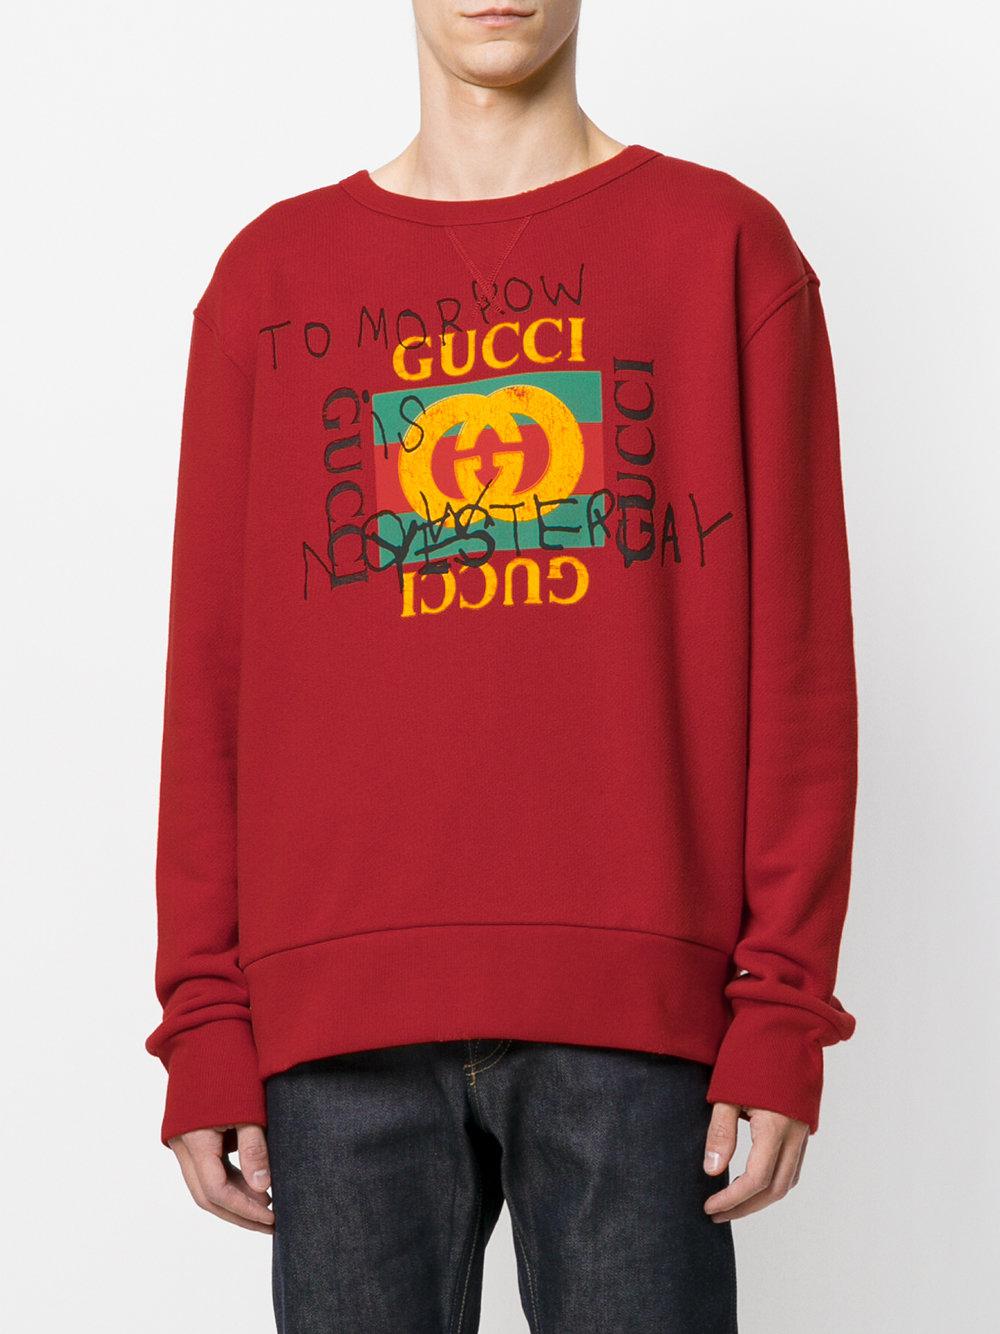 Lyst Gucci  Coco Capit n Logo Sweatshirt  in Red  for Men